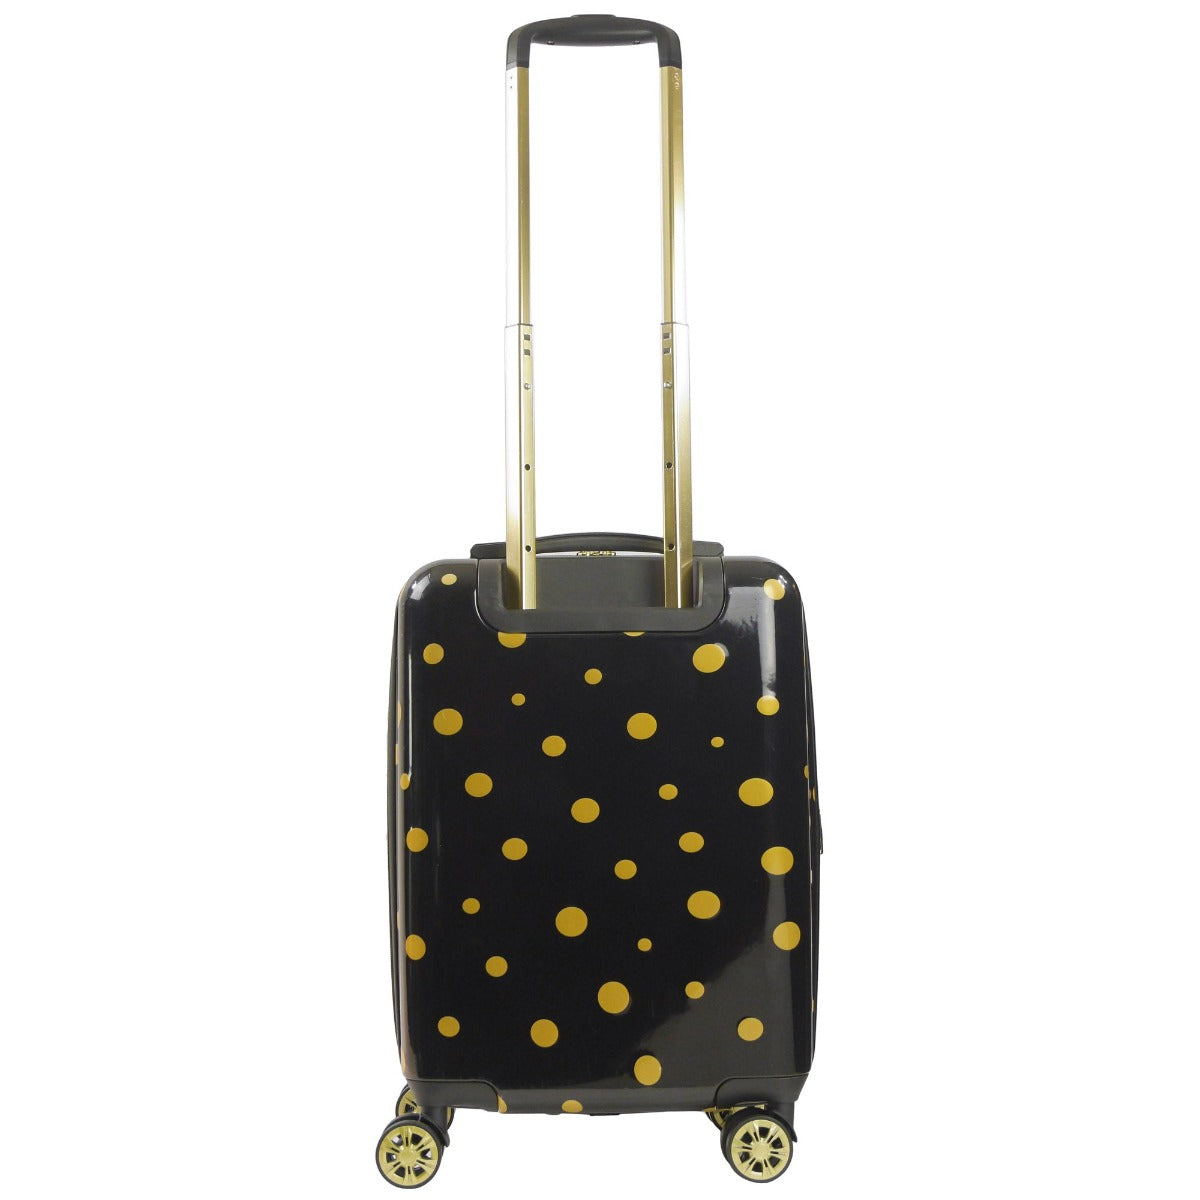 Ful Impulse Mixed Dots Hardside Spinner 22" Luggage carry-on black gold suitcase